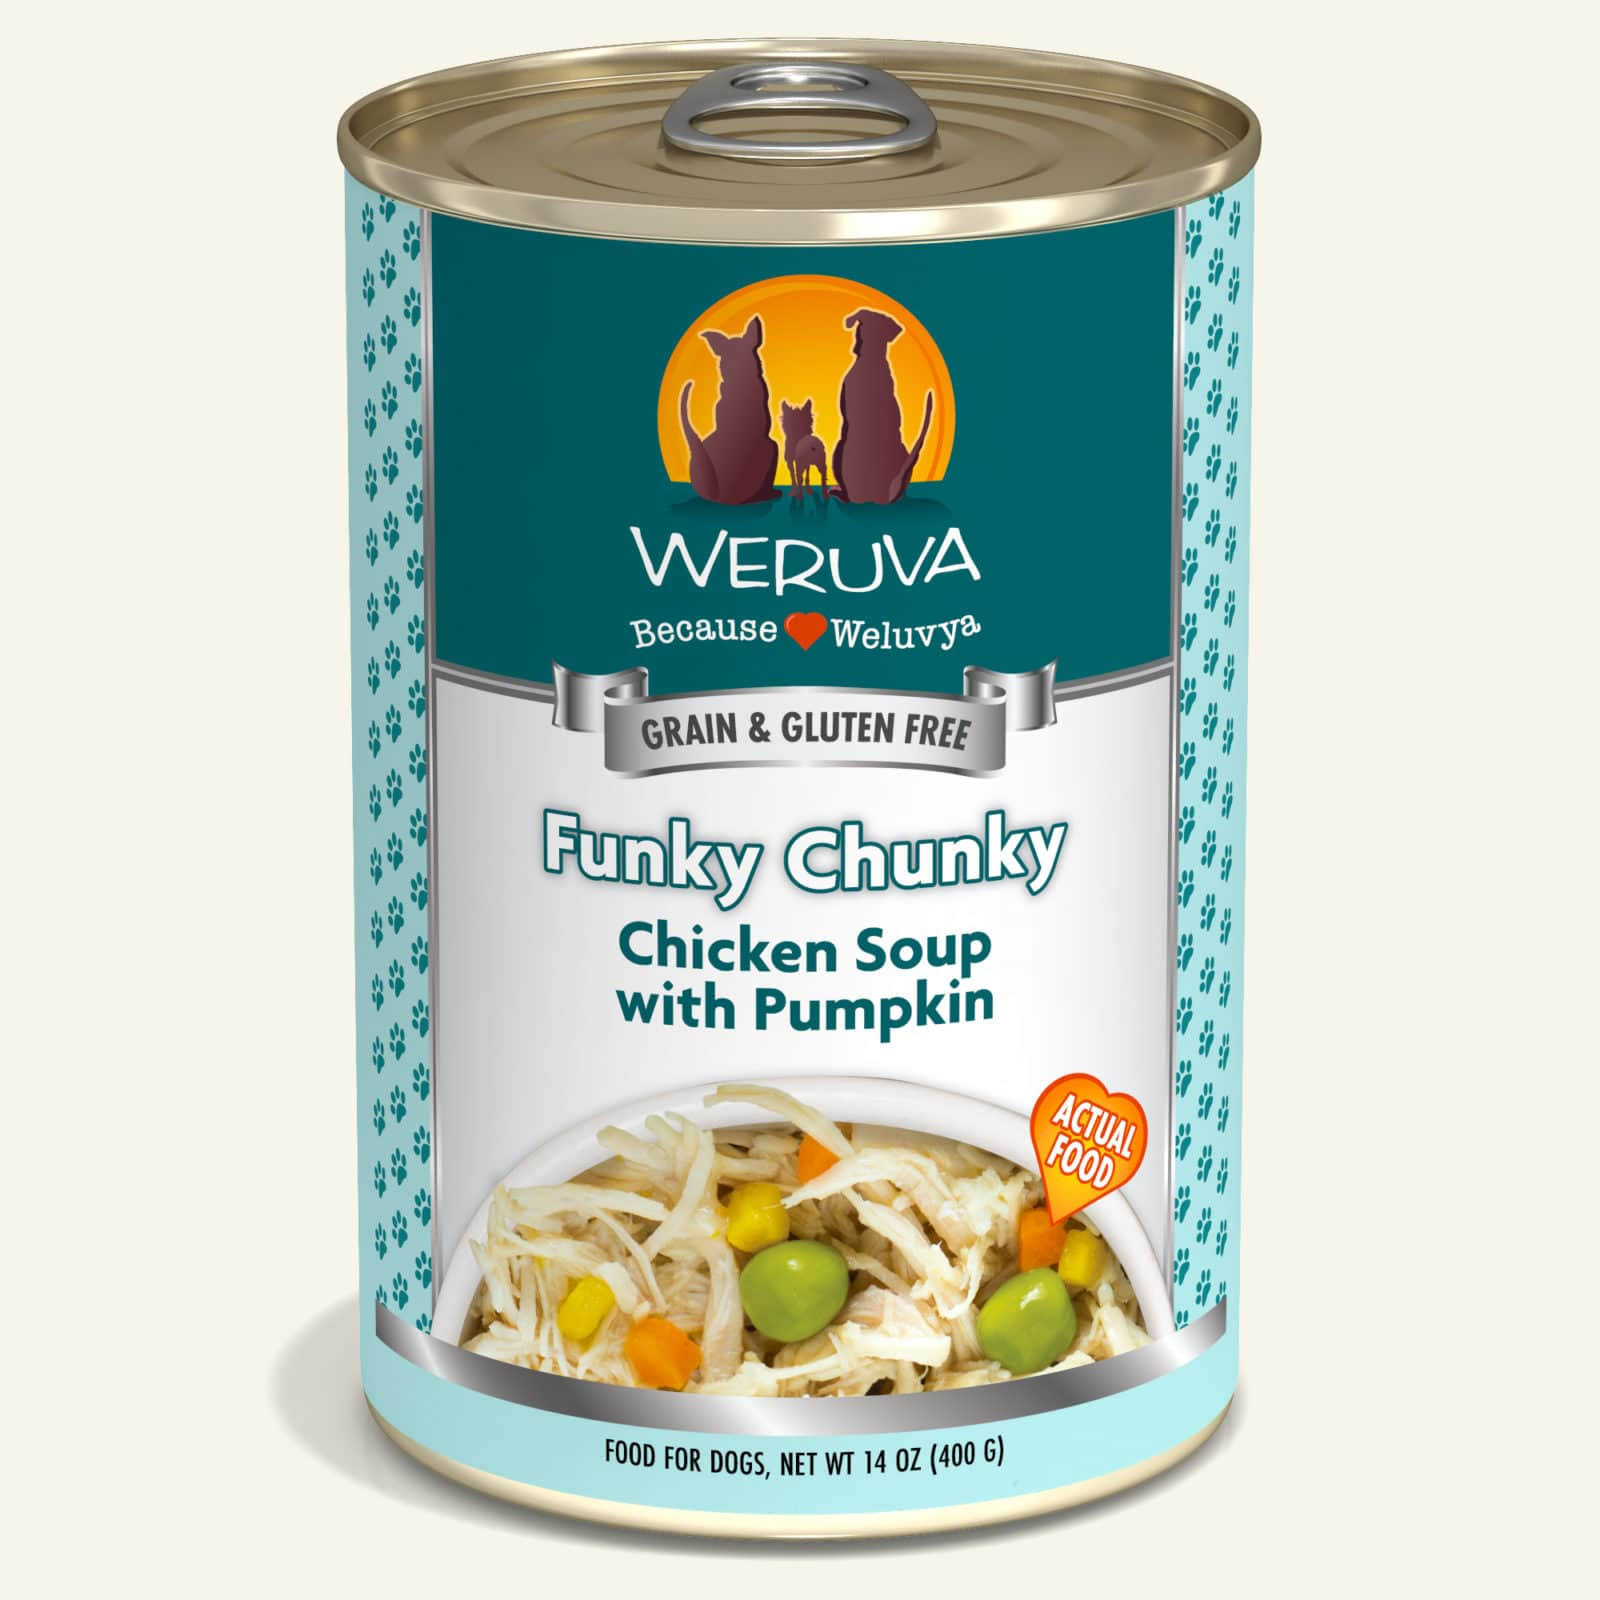 Weruva Grain-Free Canned Dog Food - Funky Chunky Chicken Soup, 14oz, x12